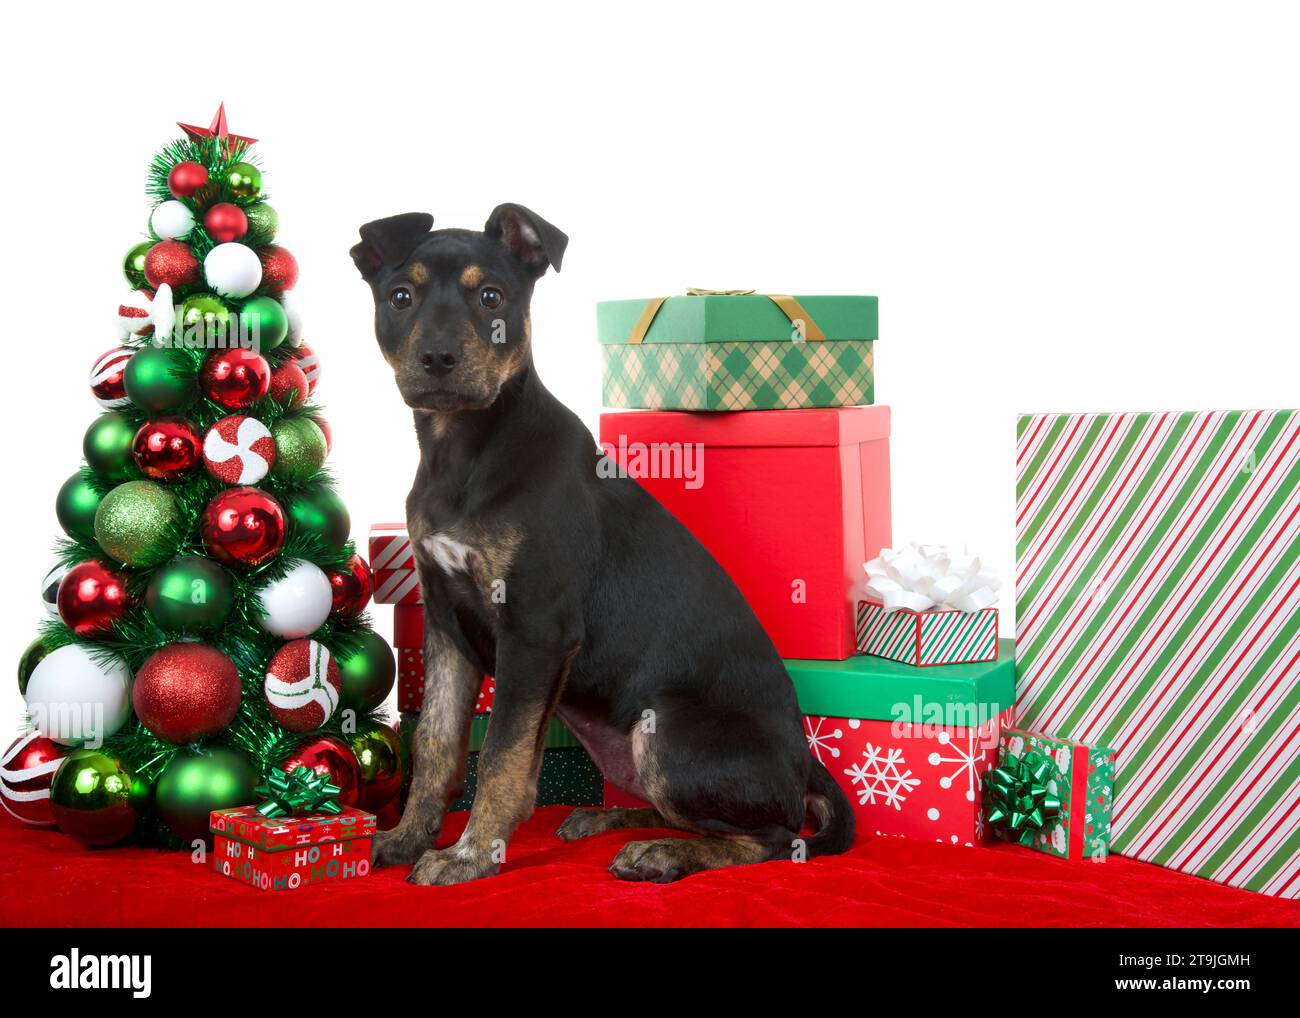 Black and brown brindle American Staffordshire Terrier puppy sitting on a red blanket next to a Christmas tree surrounded by colorful presents. Lookin Stock Photo